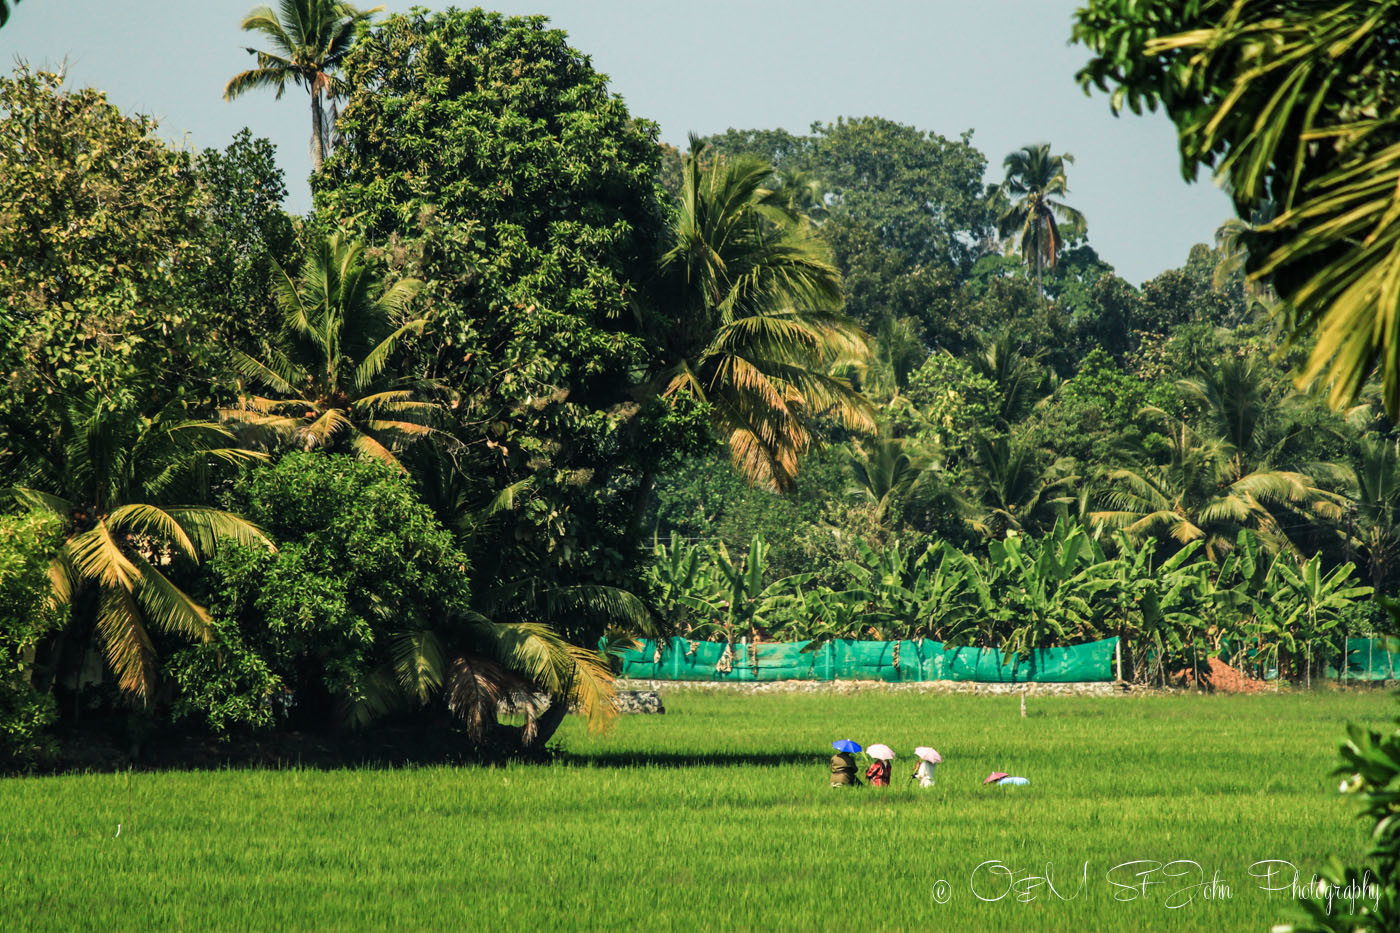 Locals in rice paddies that line the land all around the backwaters. Kerala Backwaters. India